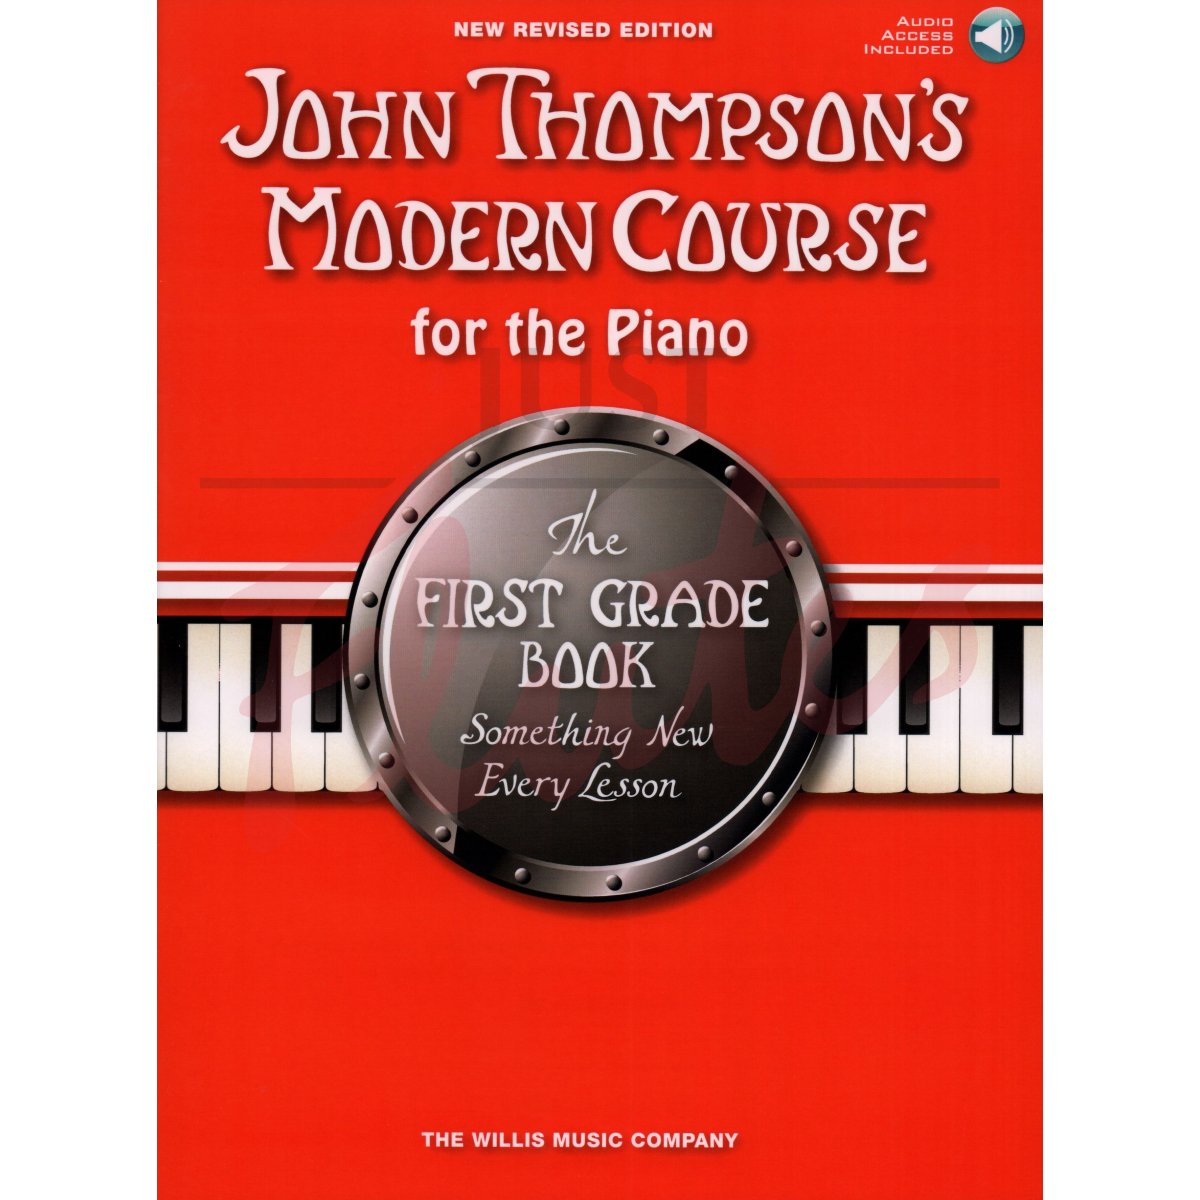 John Thompson's Modern Course for the Piano Book 1